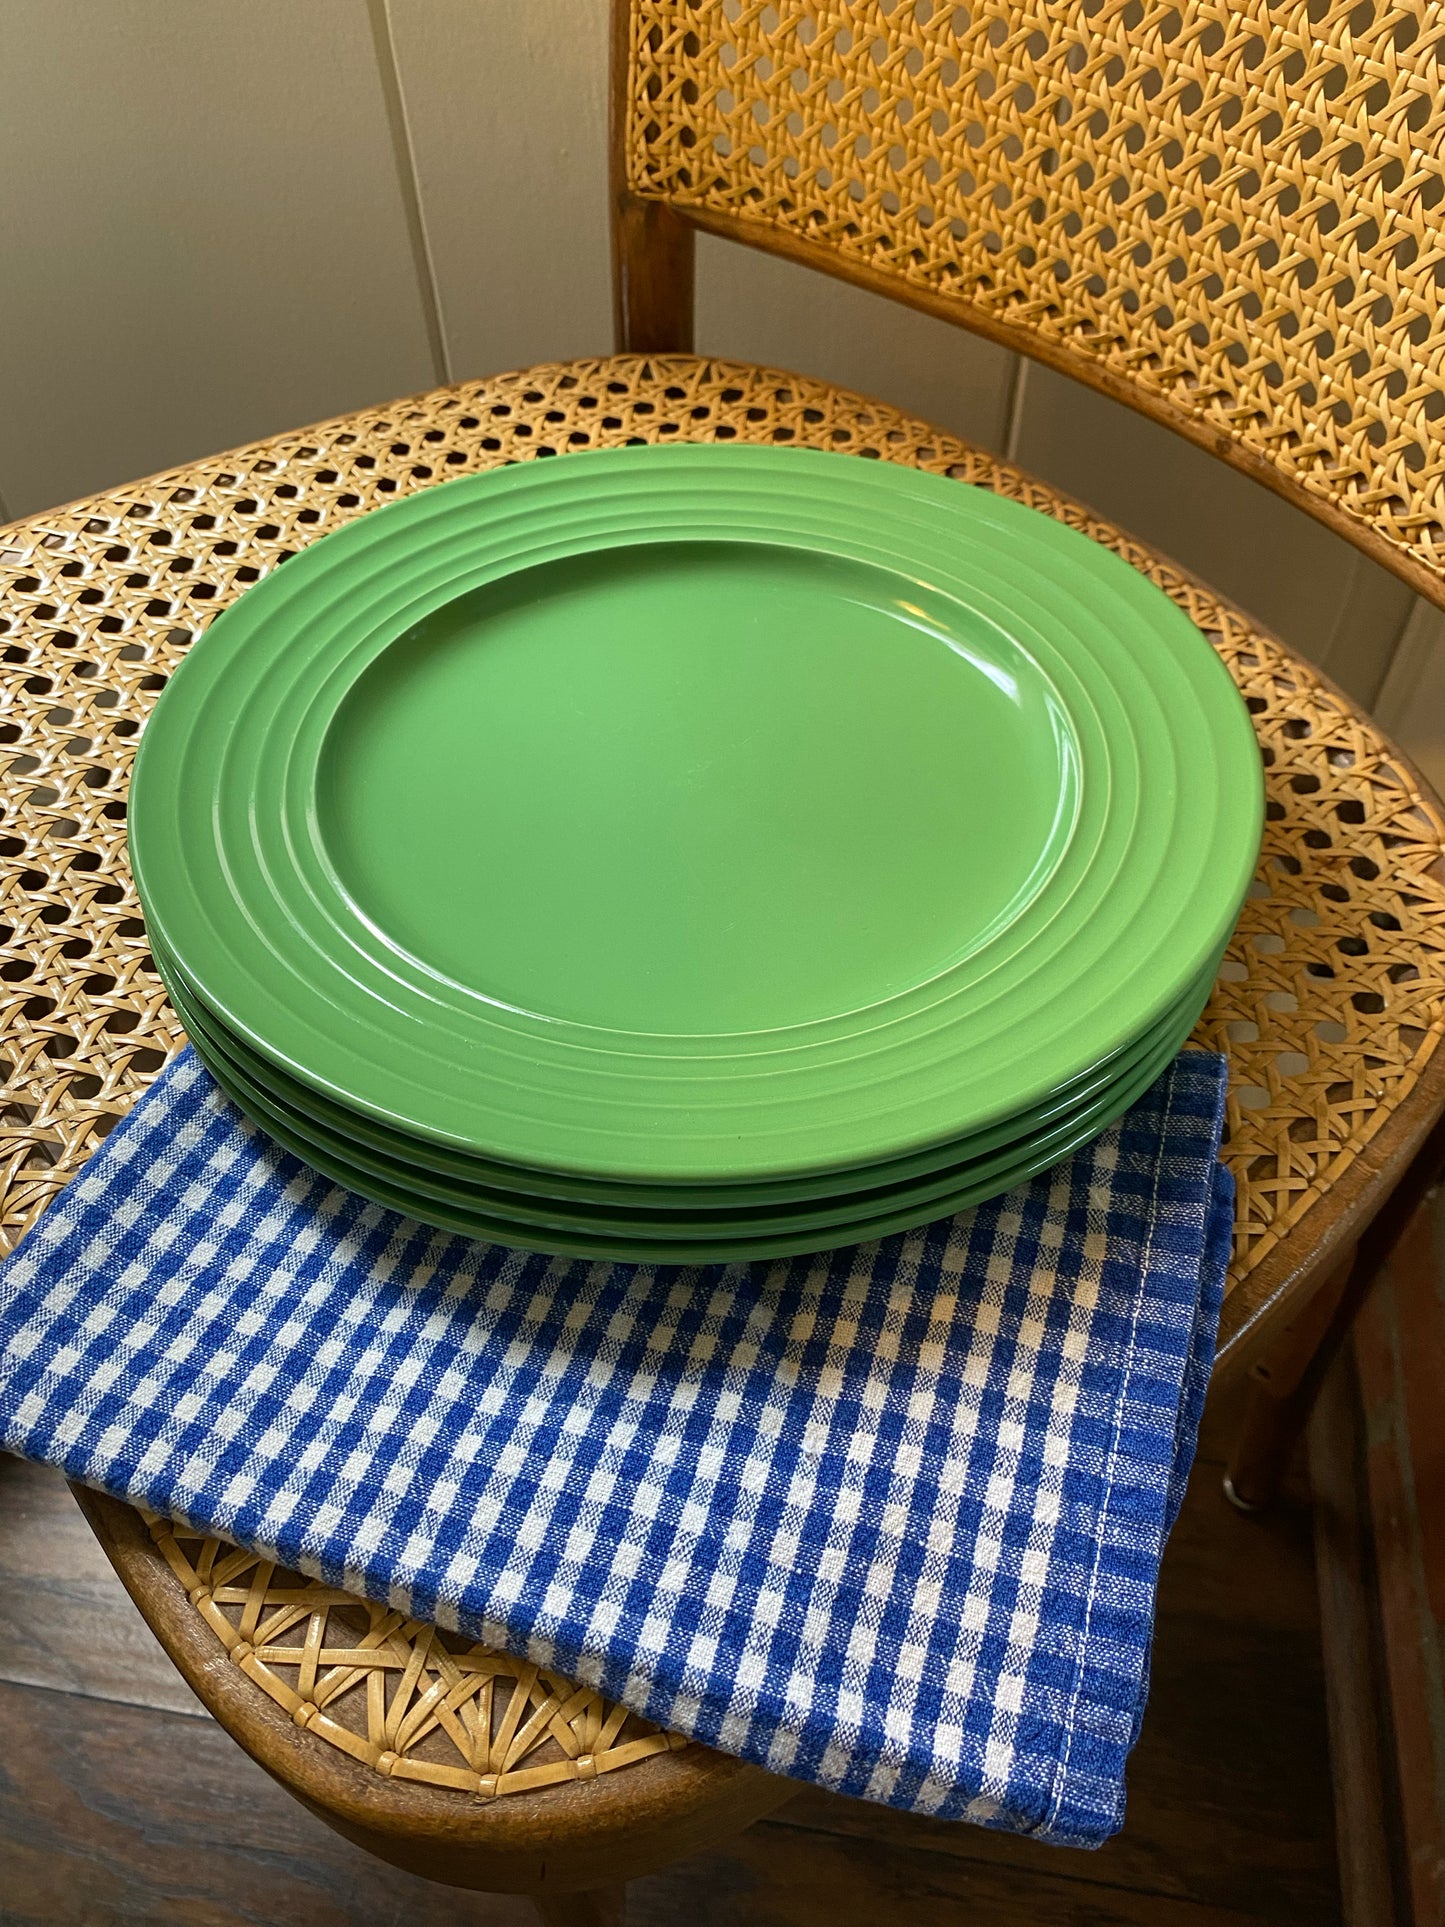 Trail Mix Dinner Plates, Set of 4